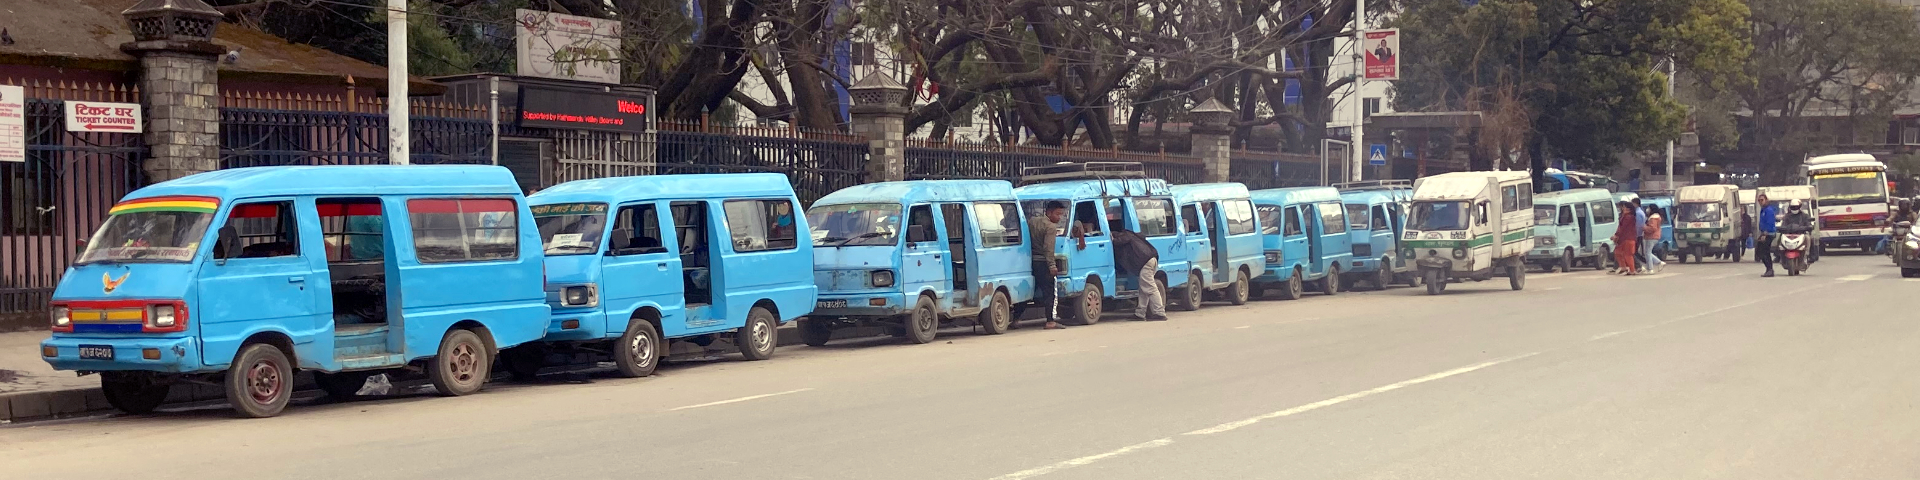 Blue Microbuses lined up at a street. 